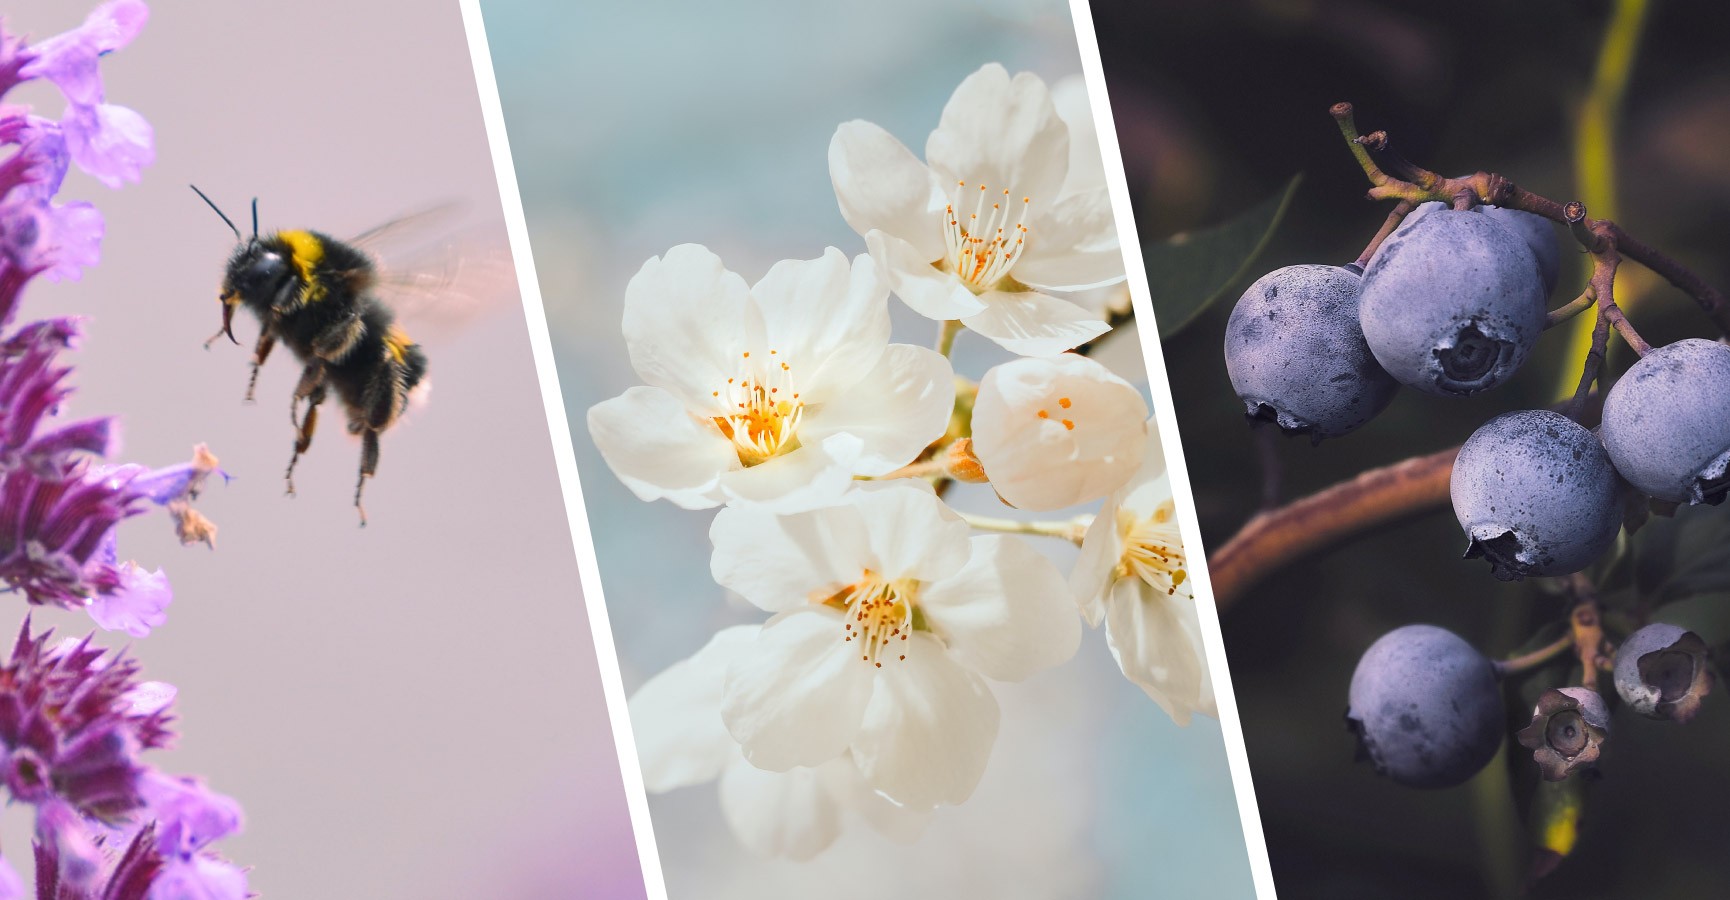 Images of a bumblebee, apple blossoms and organic blueberries